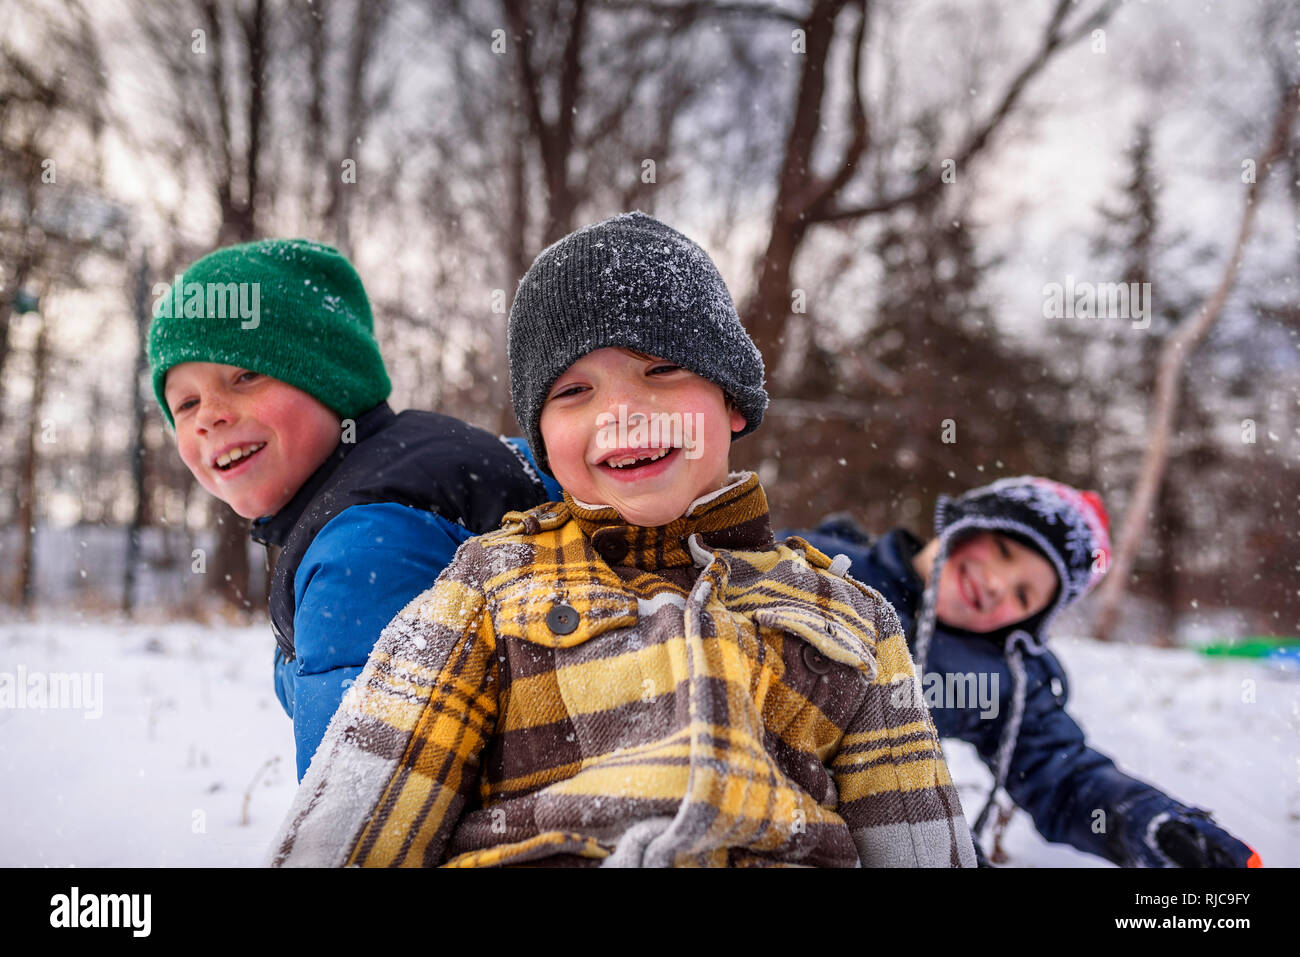 Three children messing about in the snow, Wisconsin, United States Stock Photo